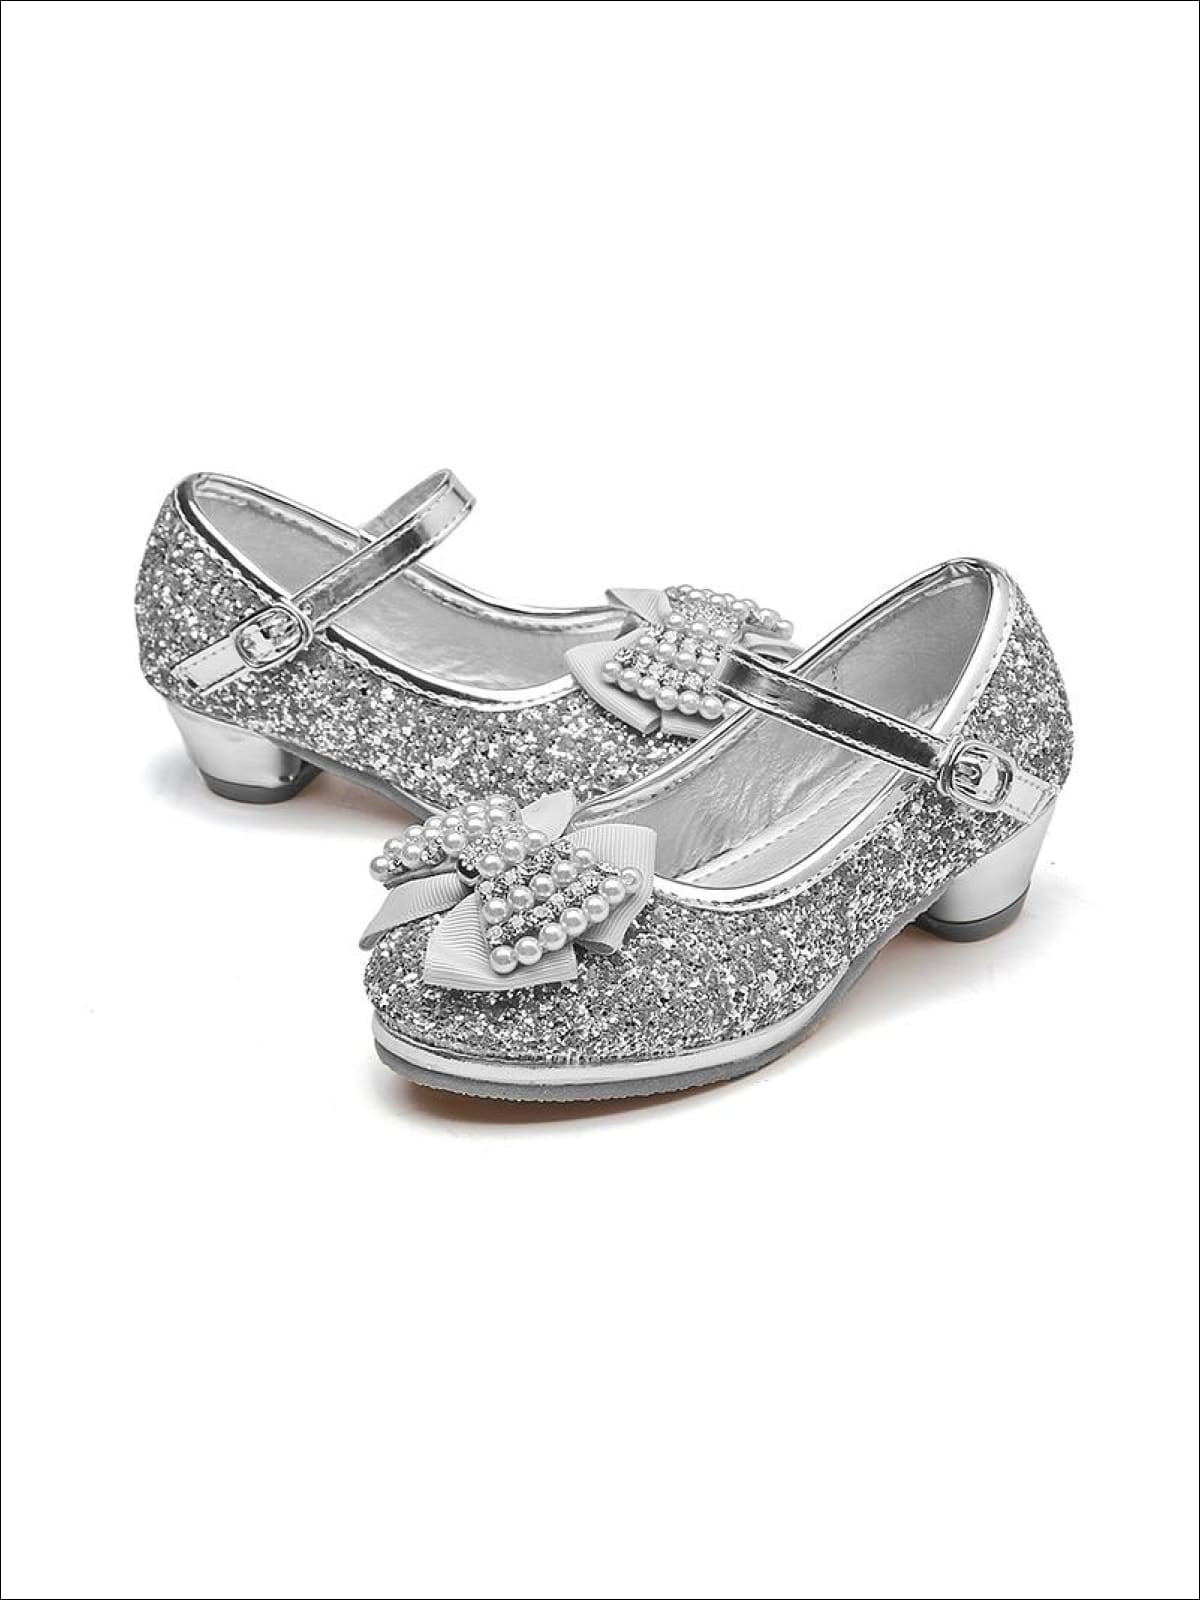 Girls Glitter Bow Tie Pearl Embellished Princess Shoes - Silver / 1 - Girls Flats